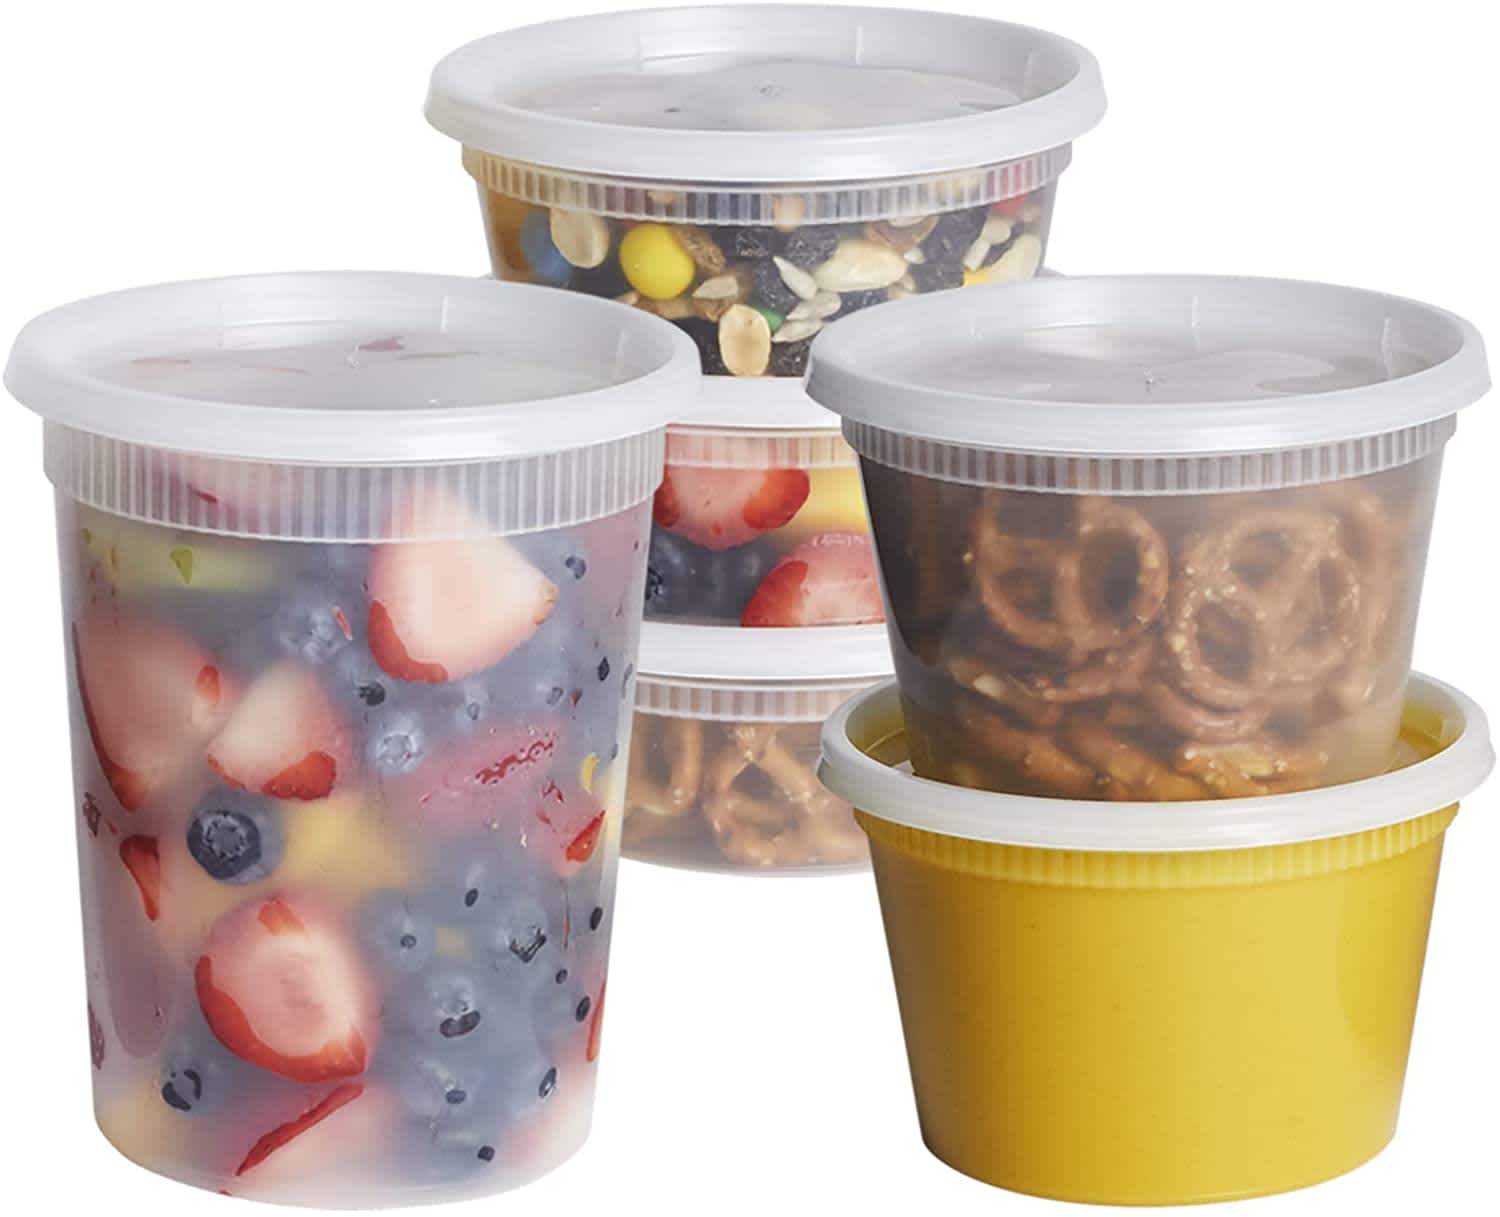 These Affordable Containers Revolutionized My Food Storage Game